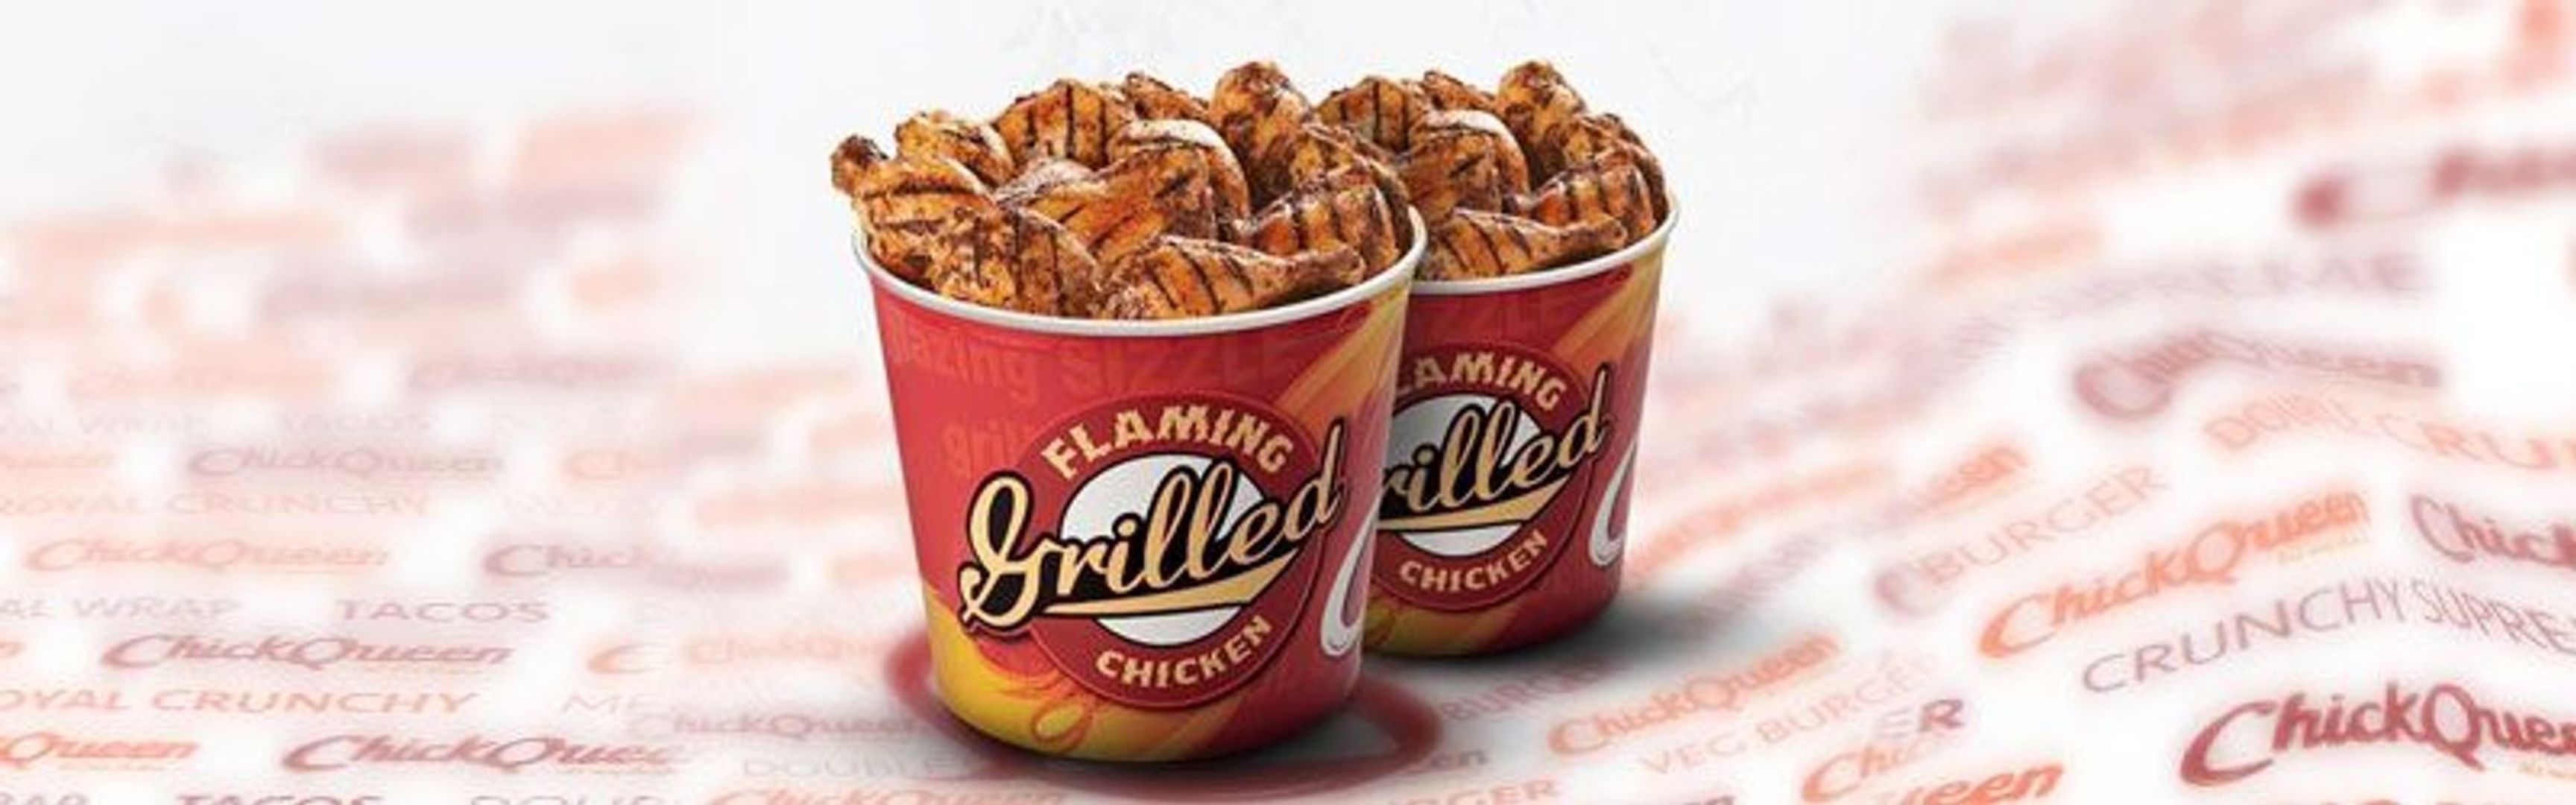 12 Pcs Grilled Chicken Family Bucket